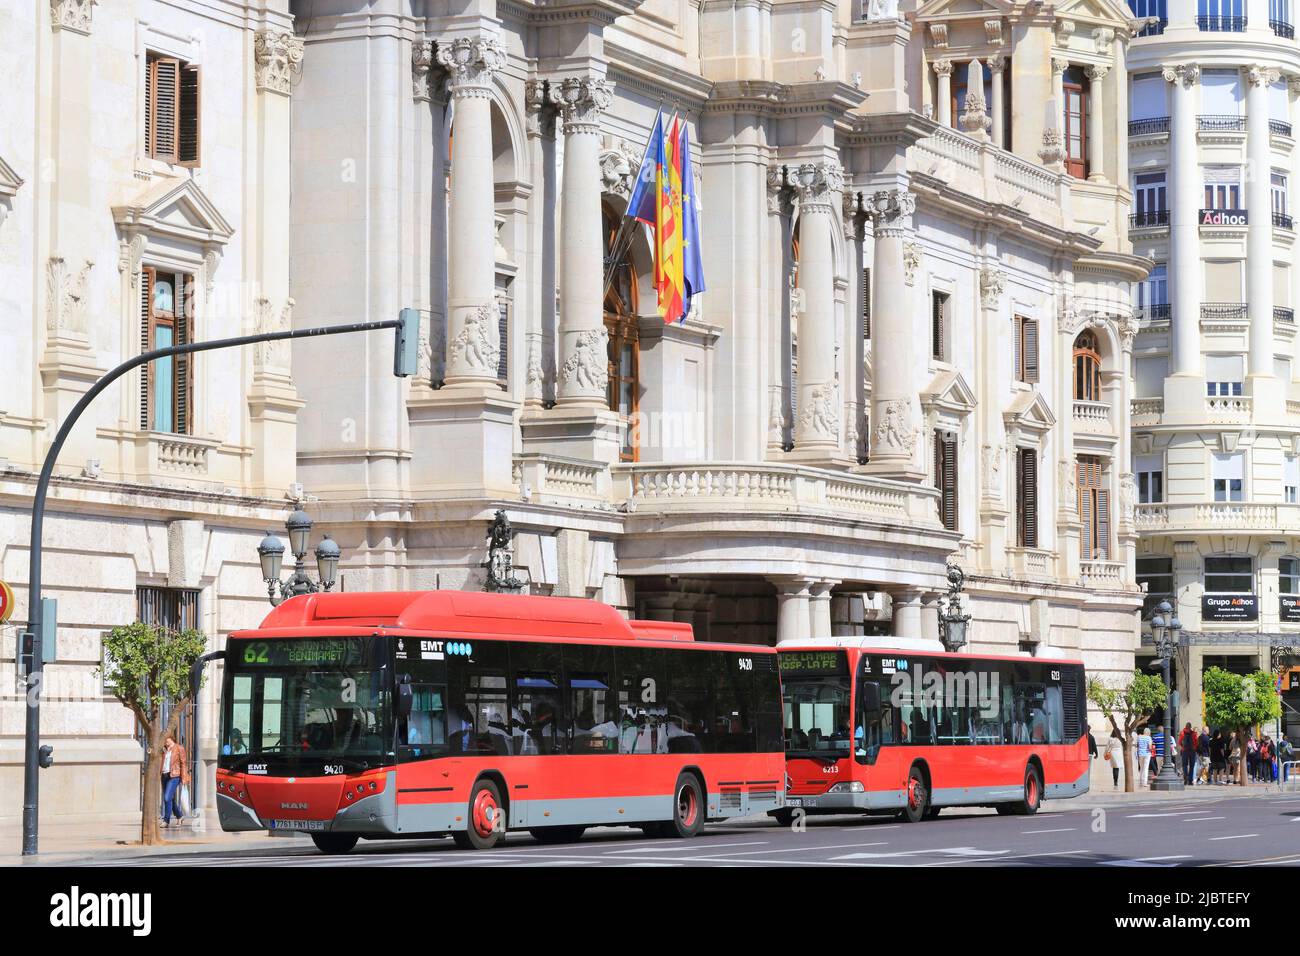 Spain, Valencia, Town Hall Square (Plaza del Ayuntamiento), bus in front of the town hall built in 1905 by the architects Francisco de Mora y Berenguer and Carlos Carbonell Pañella Stock Photo